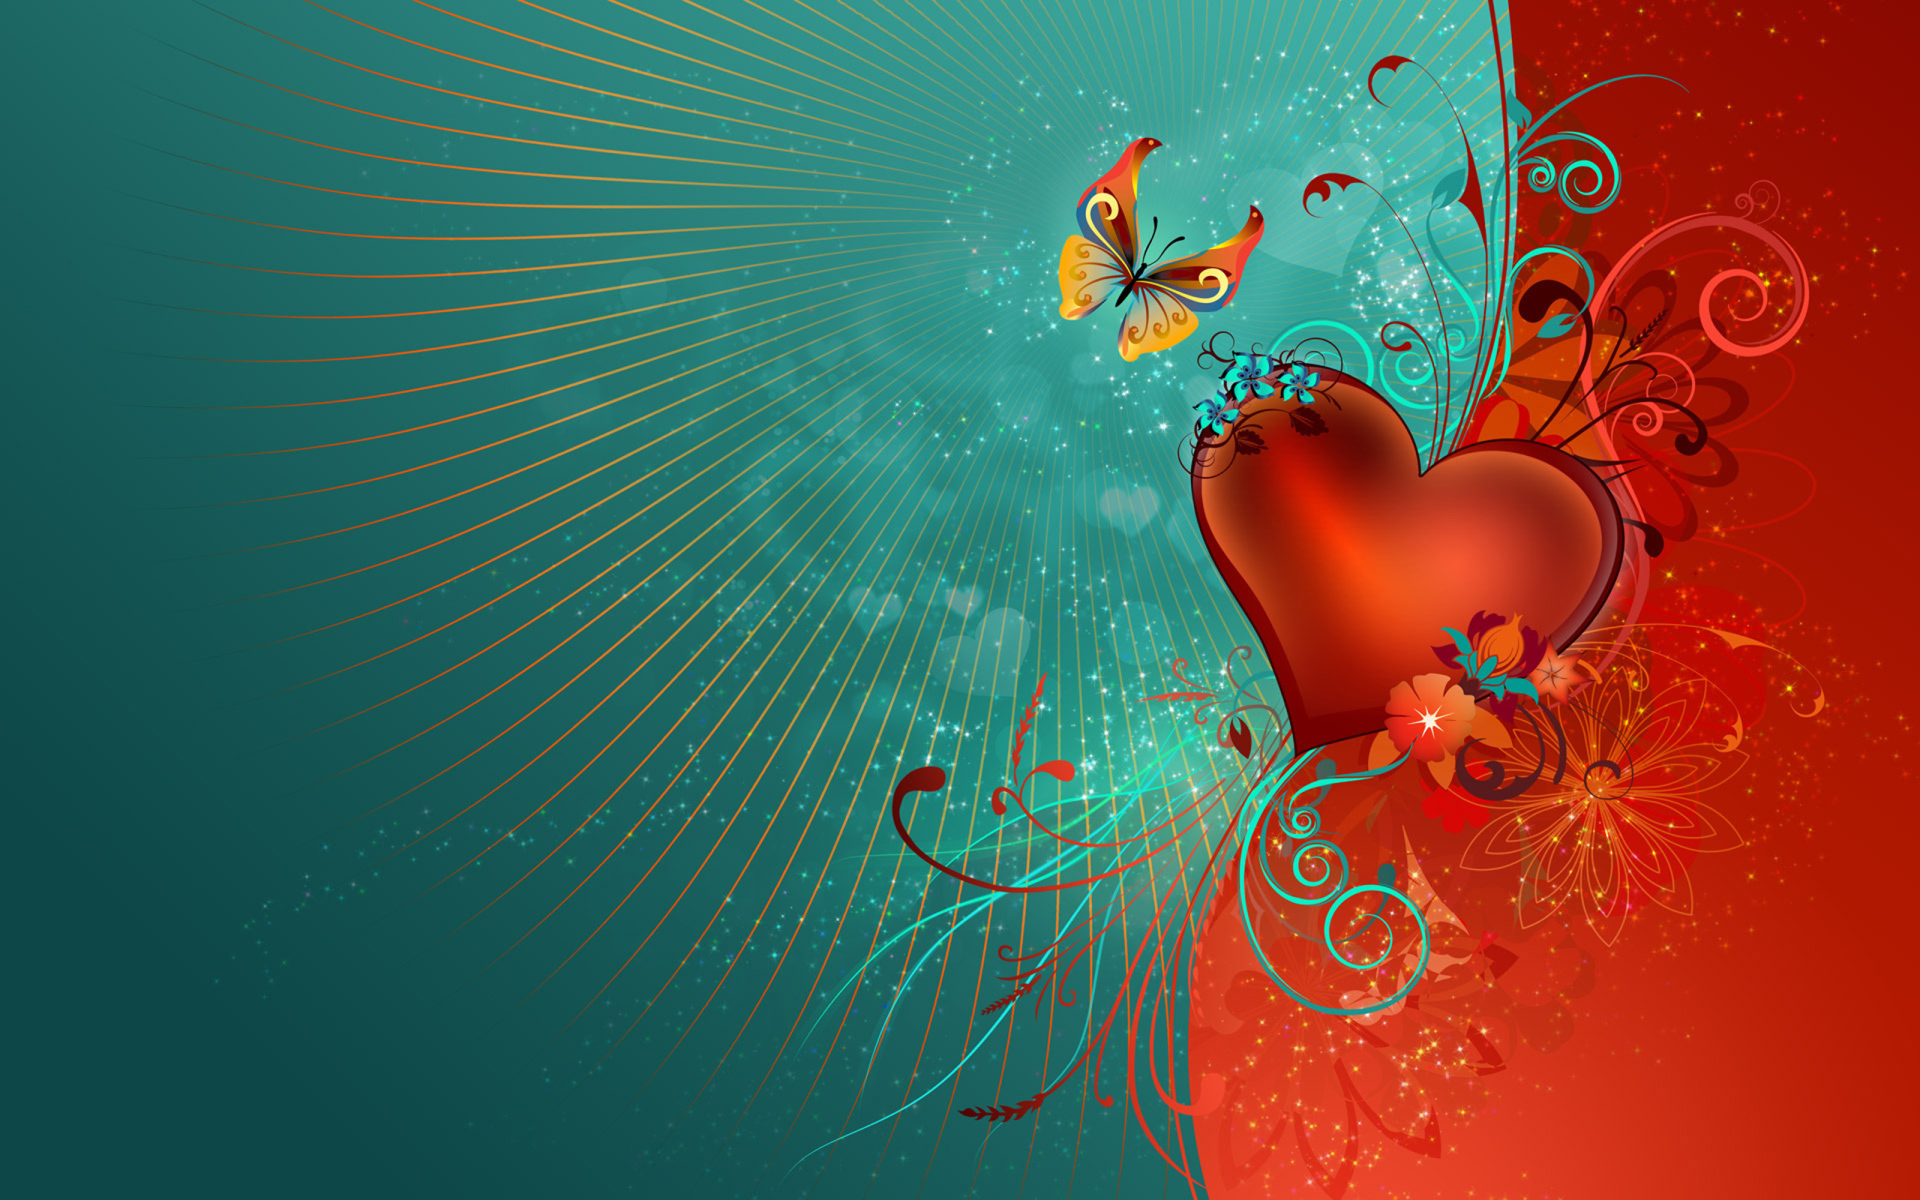 Beautiful heart with patterns background for photoshop